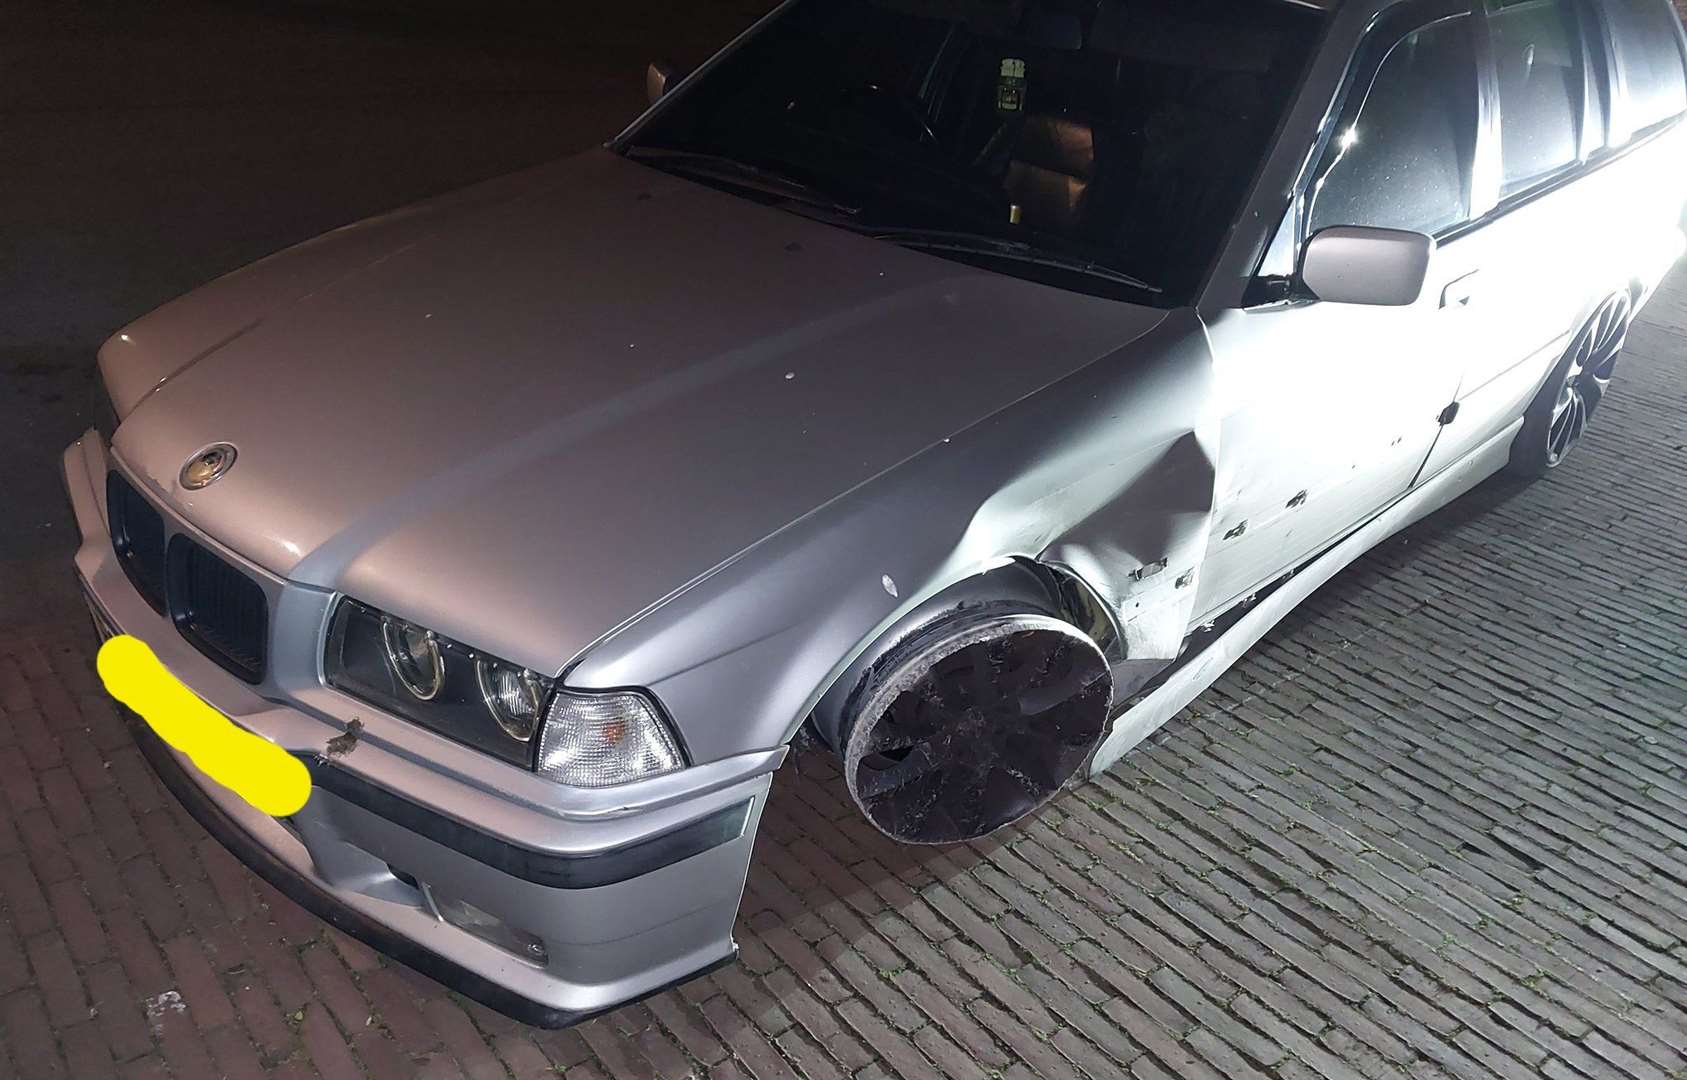 The BMW crashed into a roundabout and continued driving with a sparking wheel